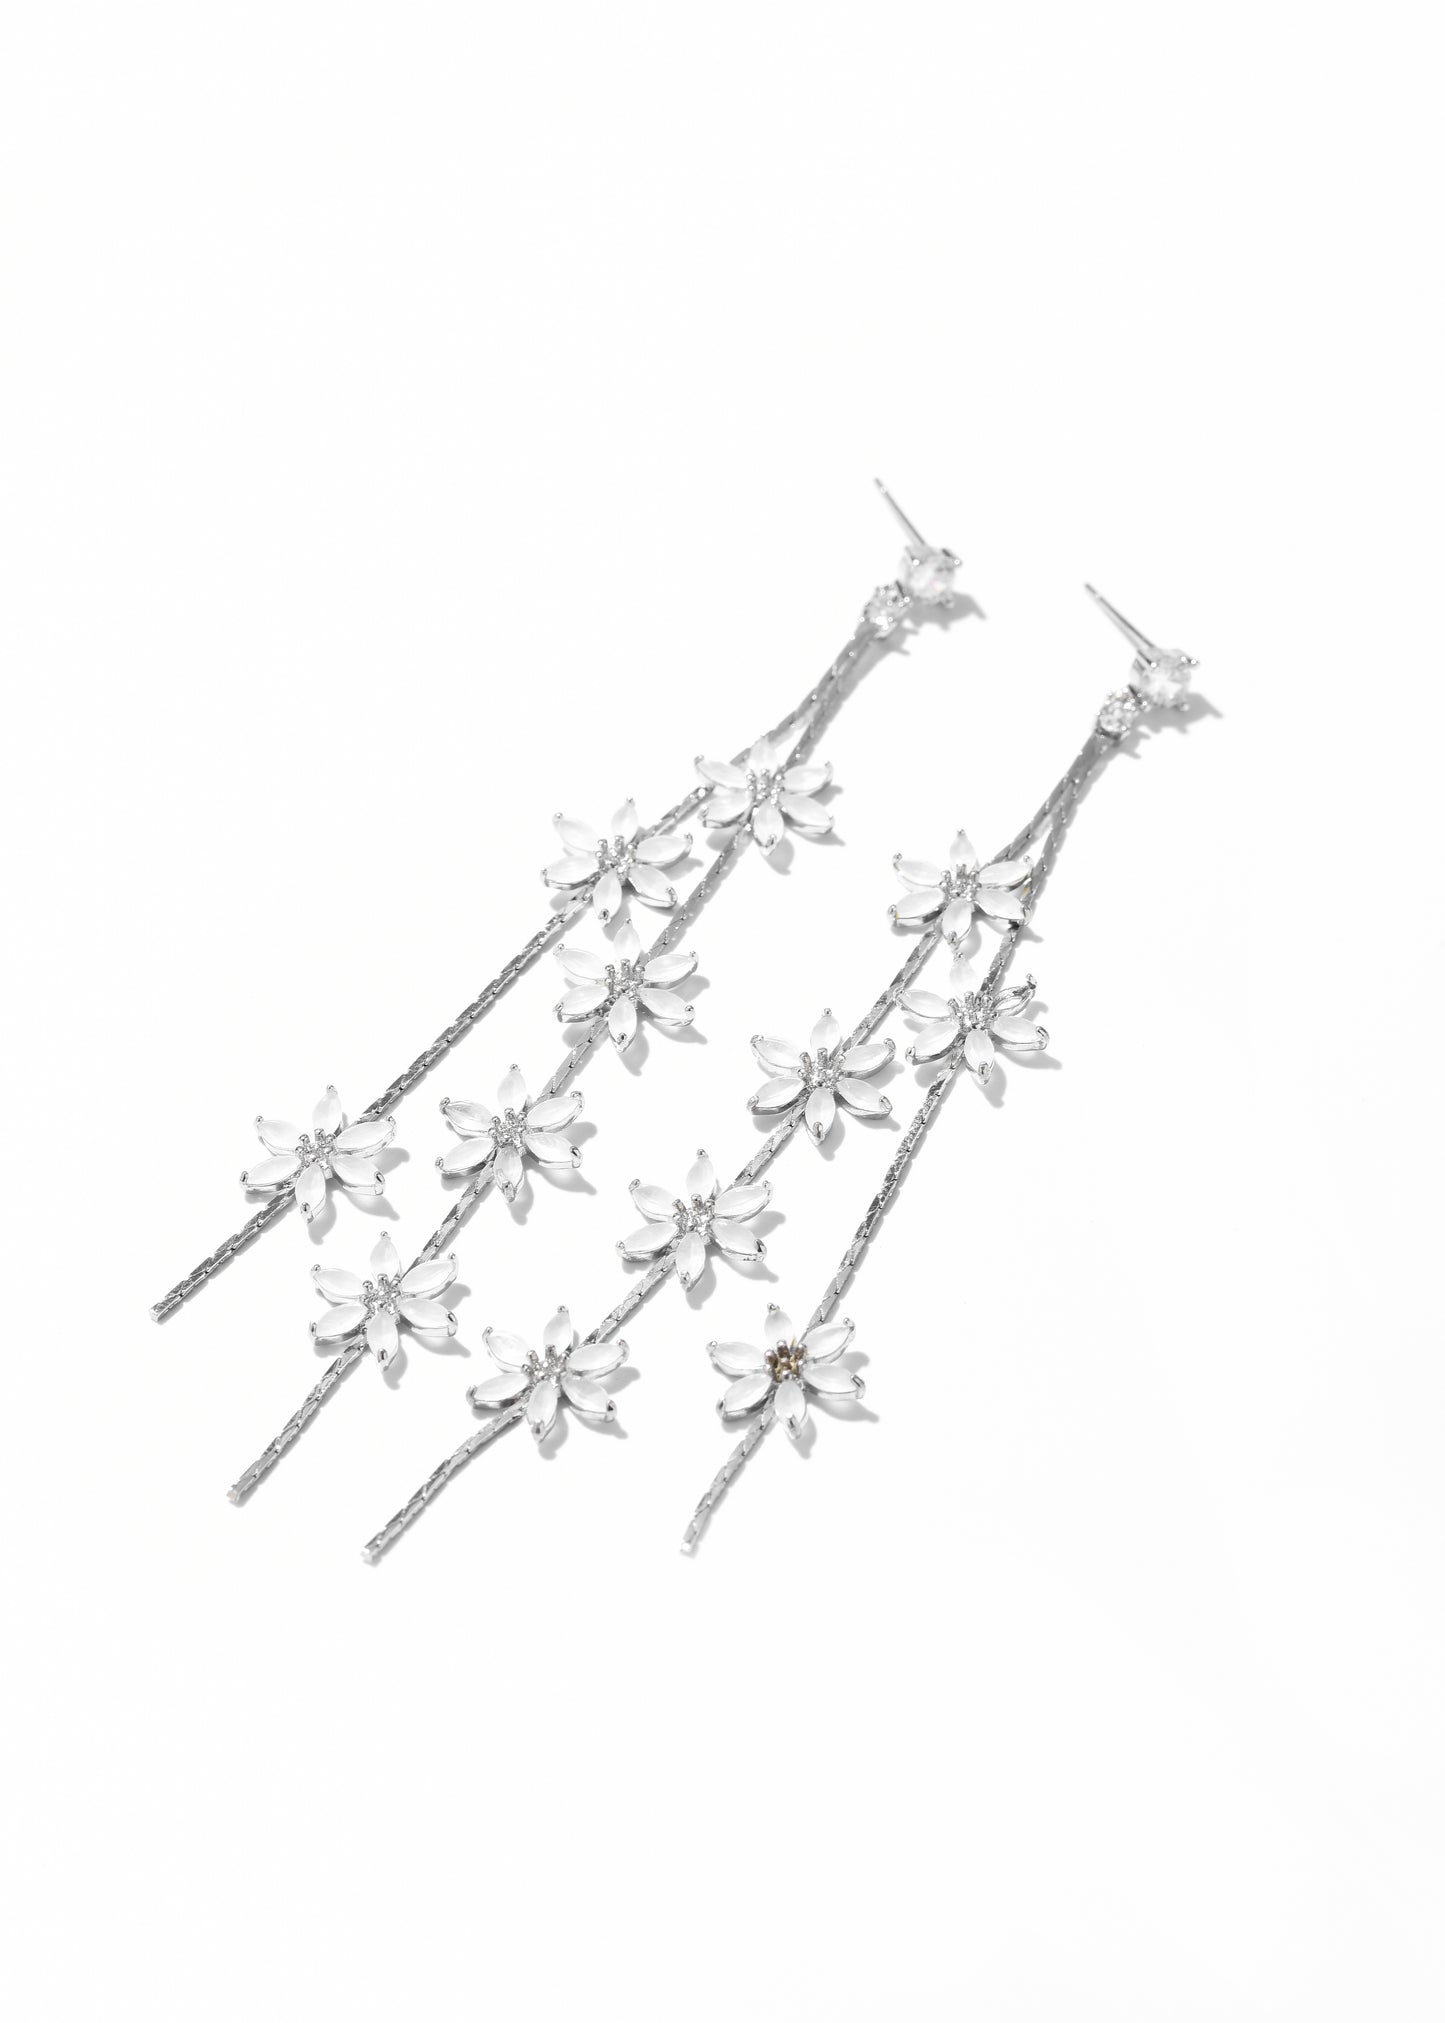 A long drop earrings with multiple small, sparkling floral earrings design trailing down.